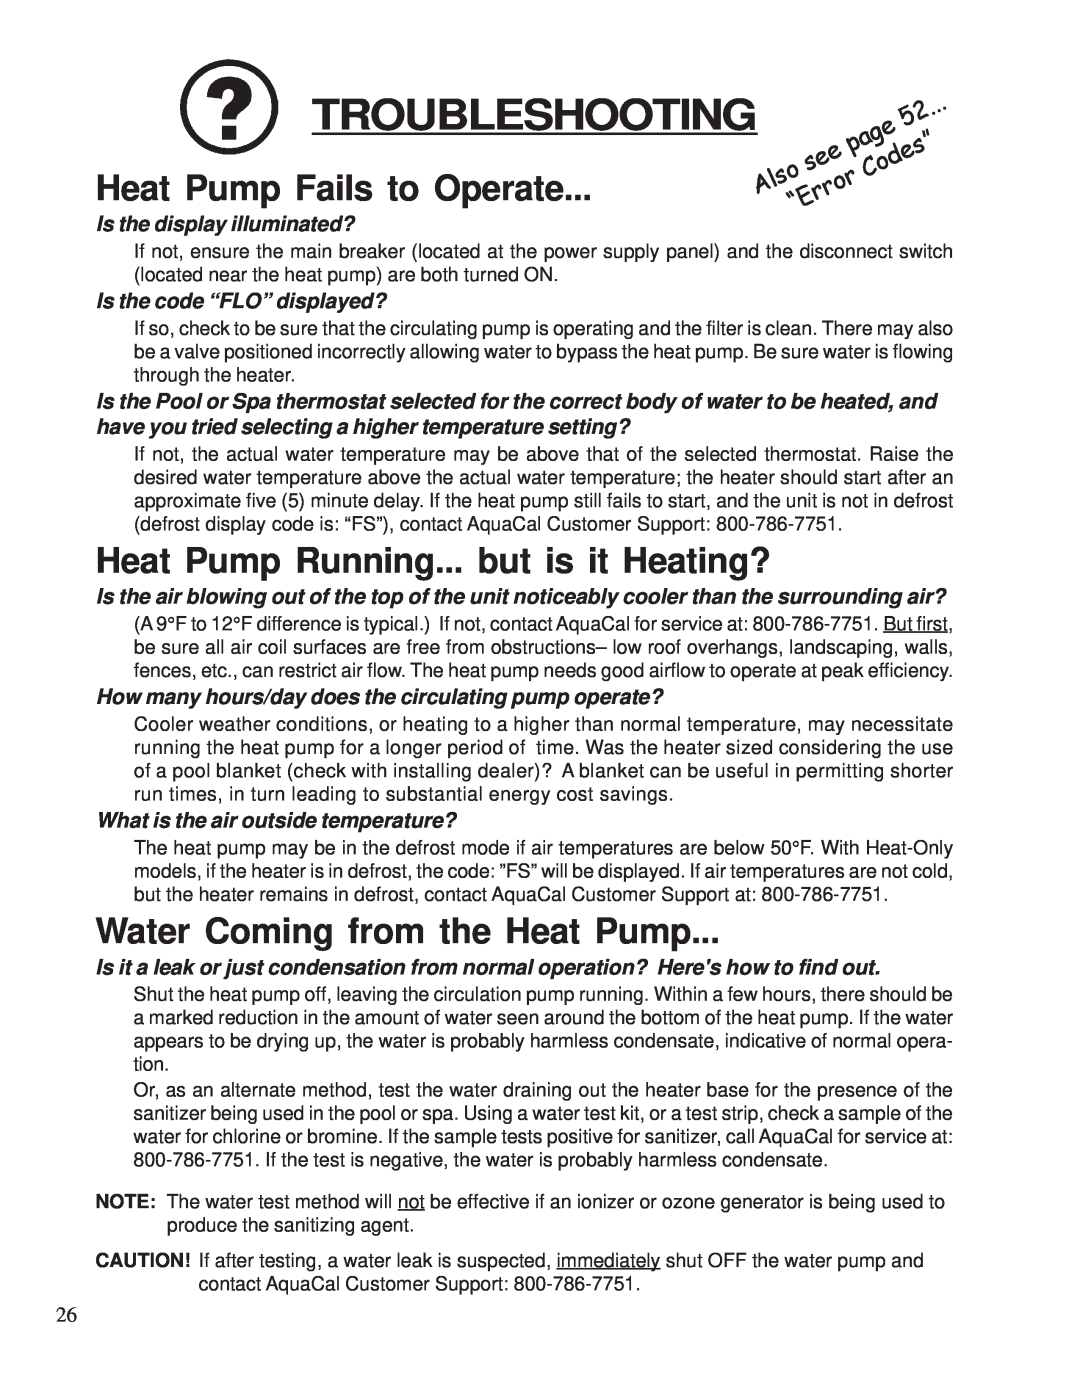 Aquacal 155 Troubleshooting, Heat Pump Fails to Operate, Heat Pump Running... but is it Heating?, page, see Codes”, Also 